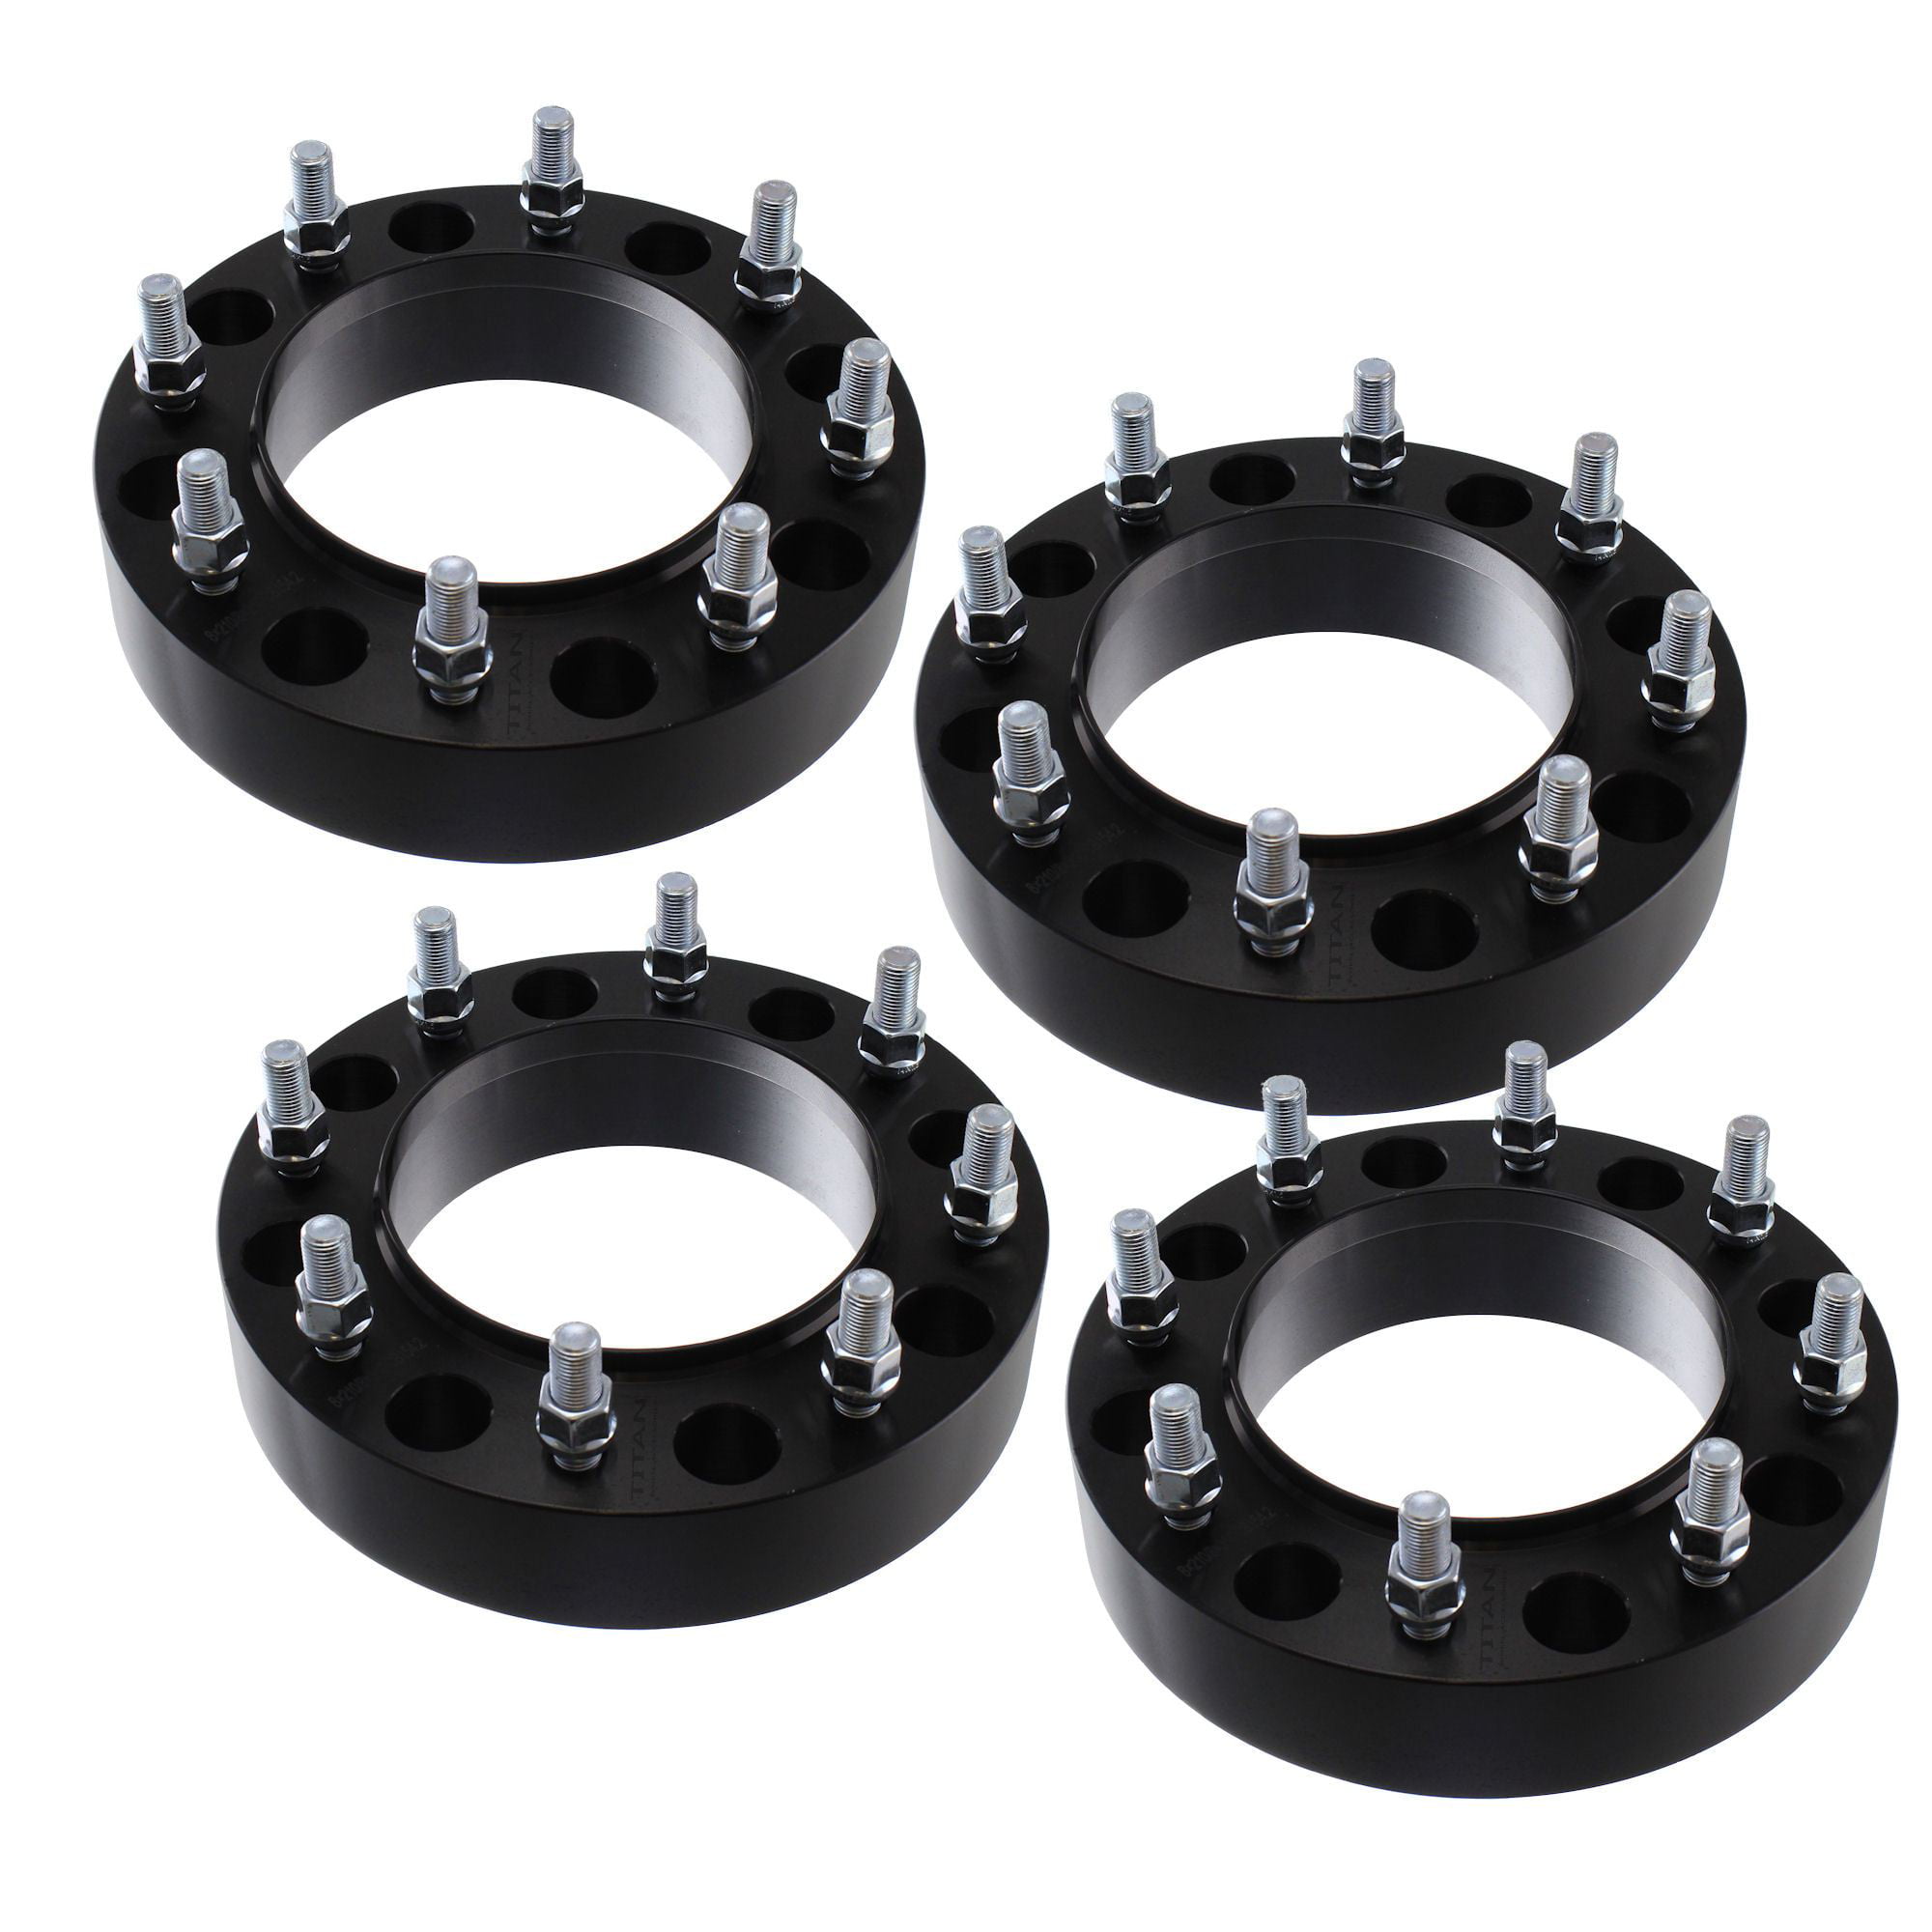 4 pc 8x210 1" Wheel Spacer Adapter First GMC & Chevy 3500 Dually Vehicles.